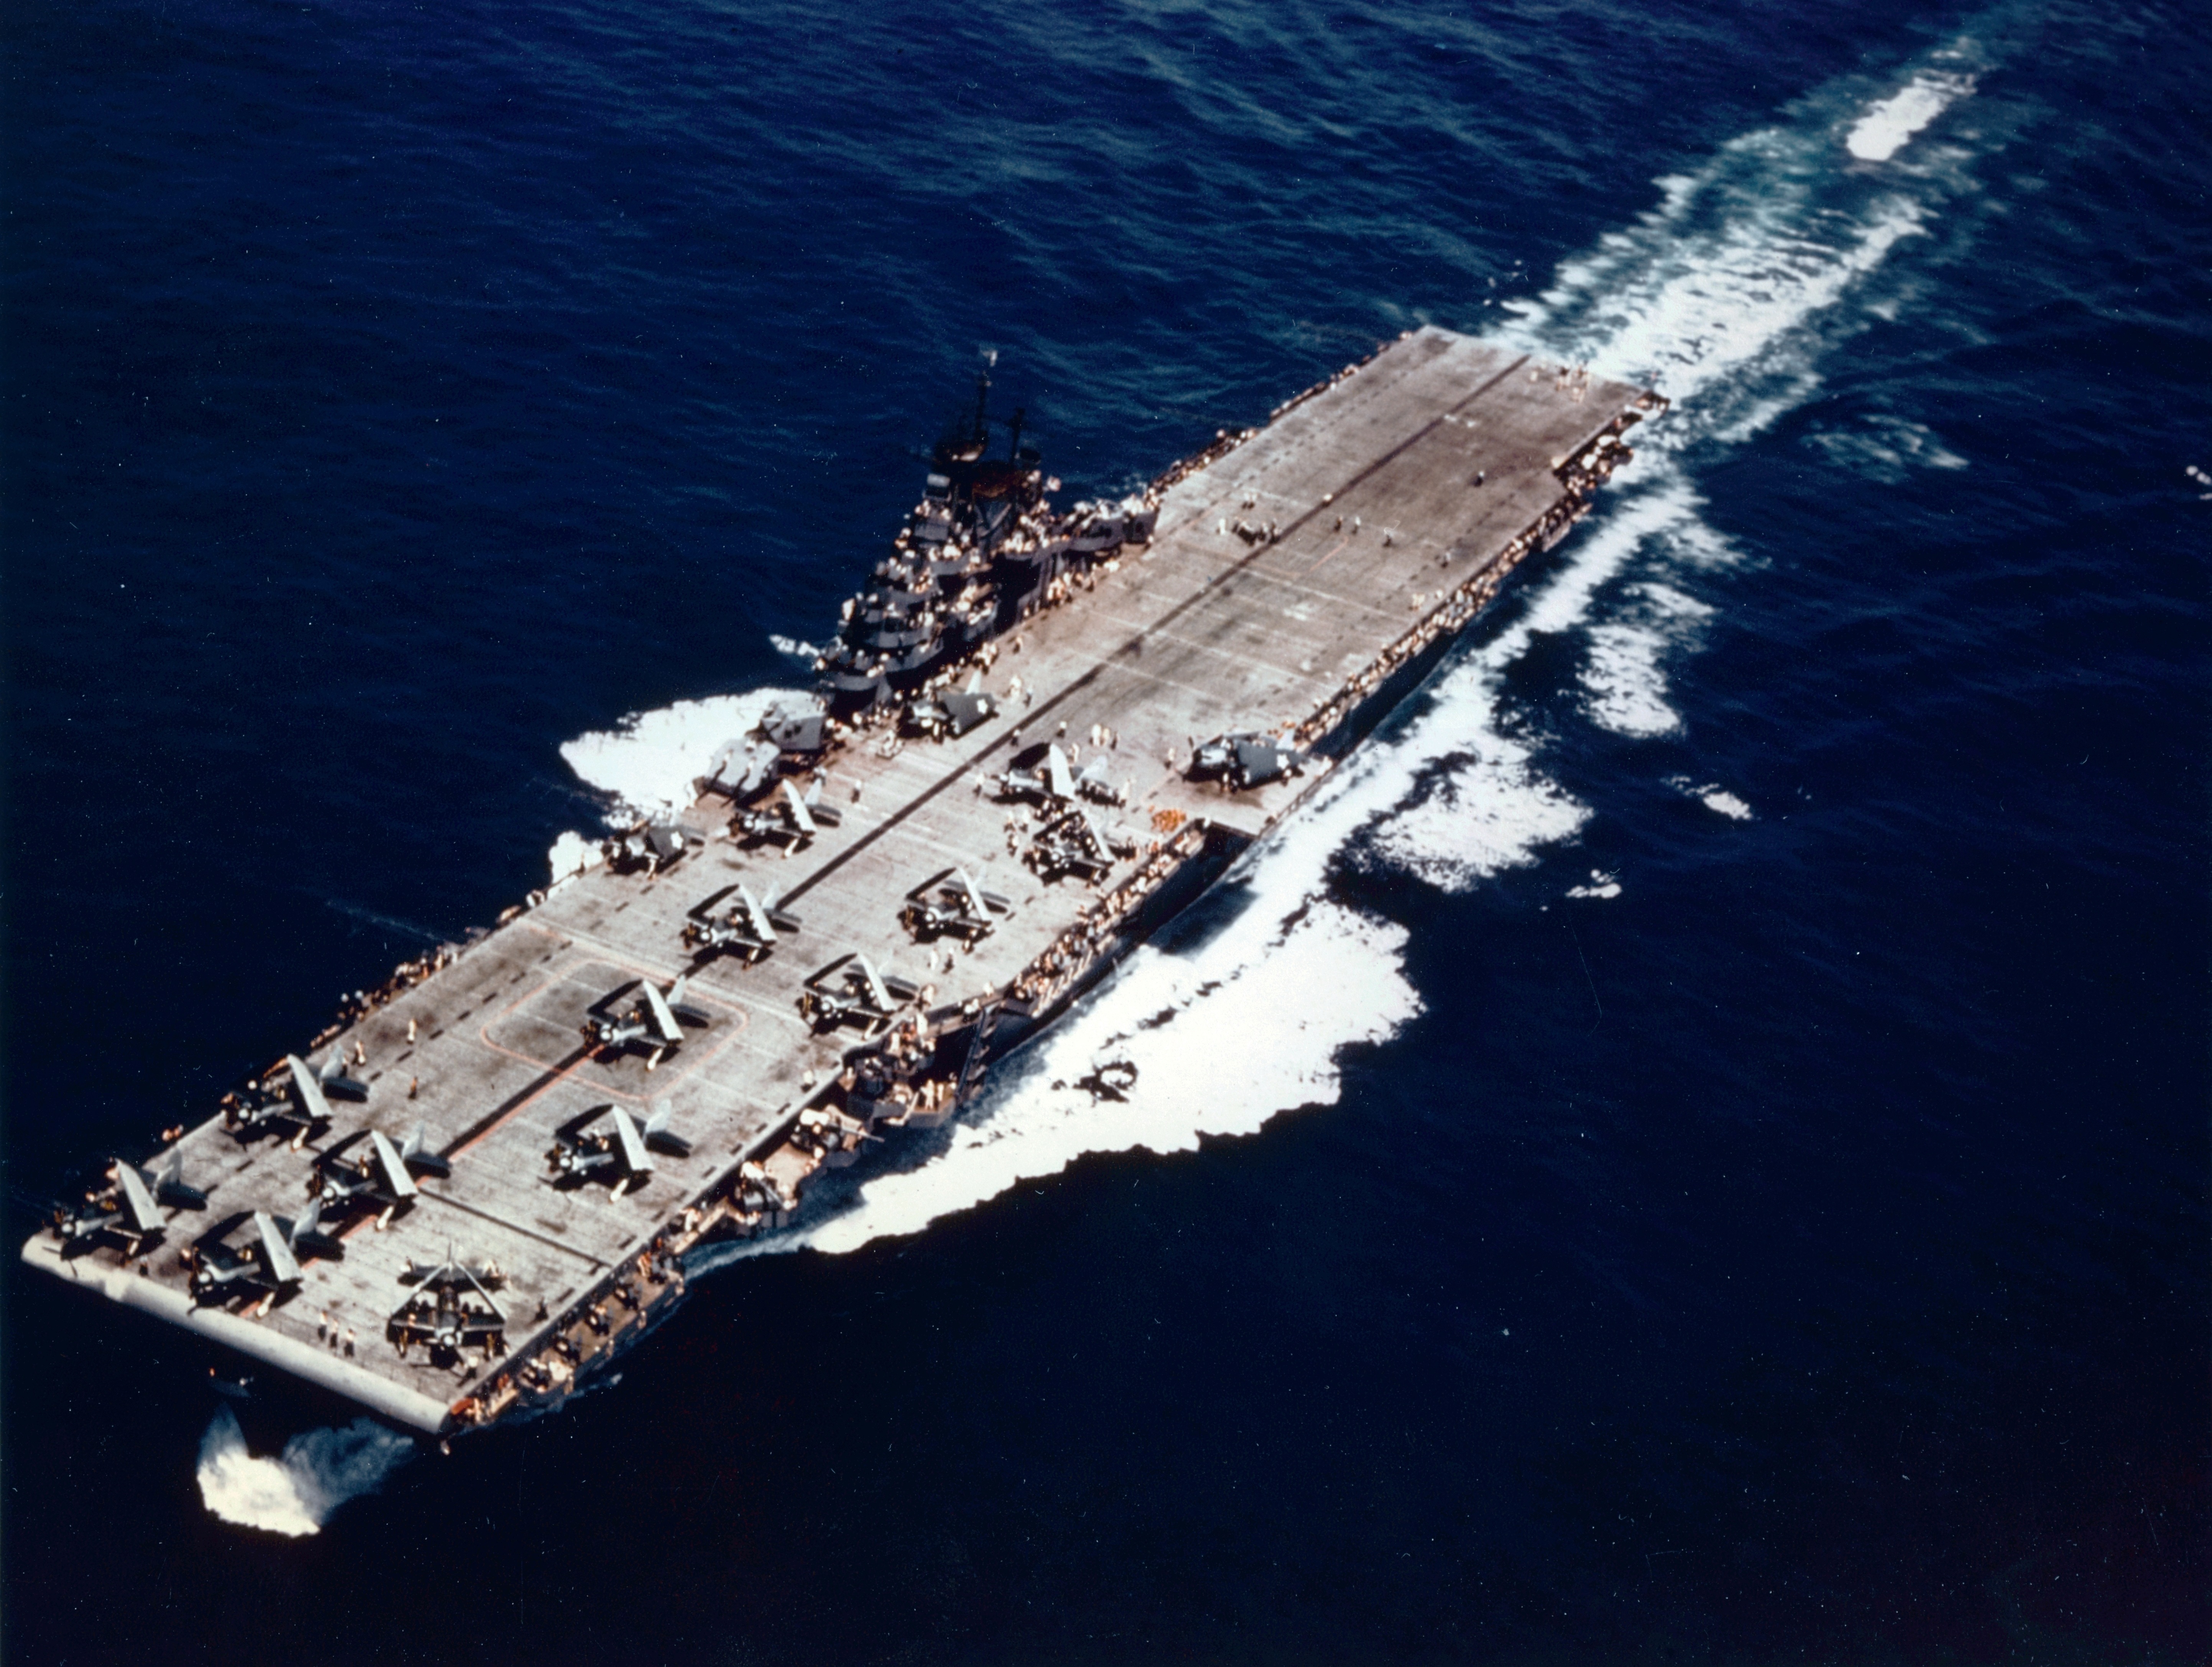 Yorktown (Essex-class; CV-10) circa mid-1943 with Hellcat fighters and Helldiver dive bombers on her flight deck